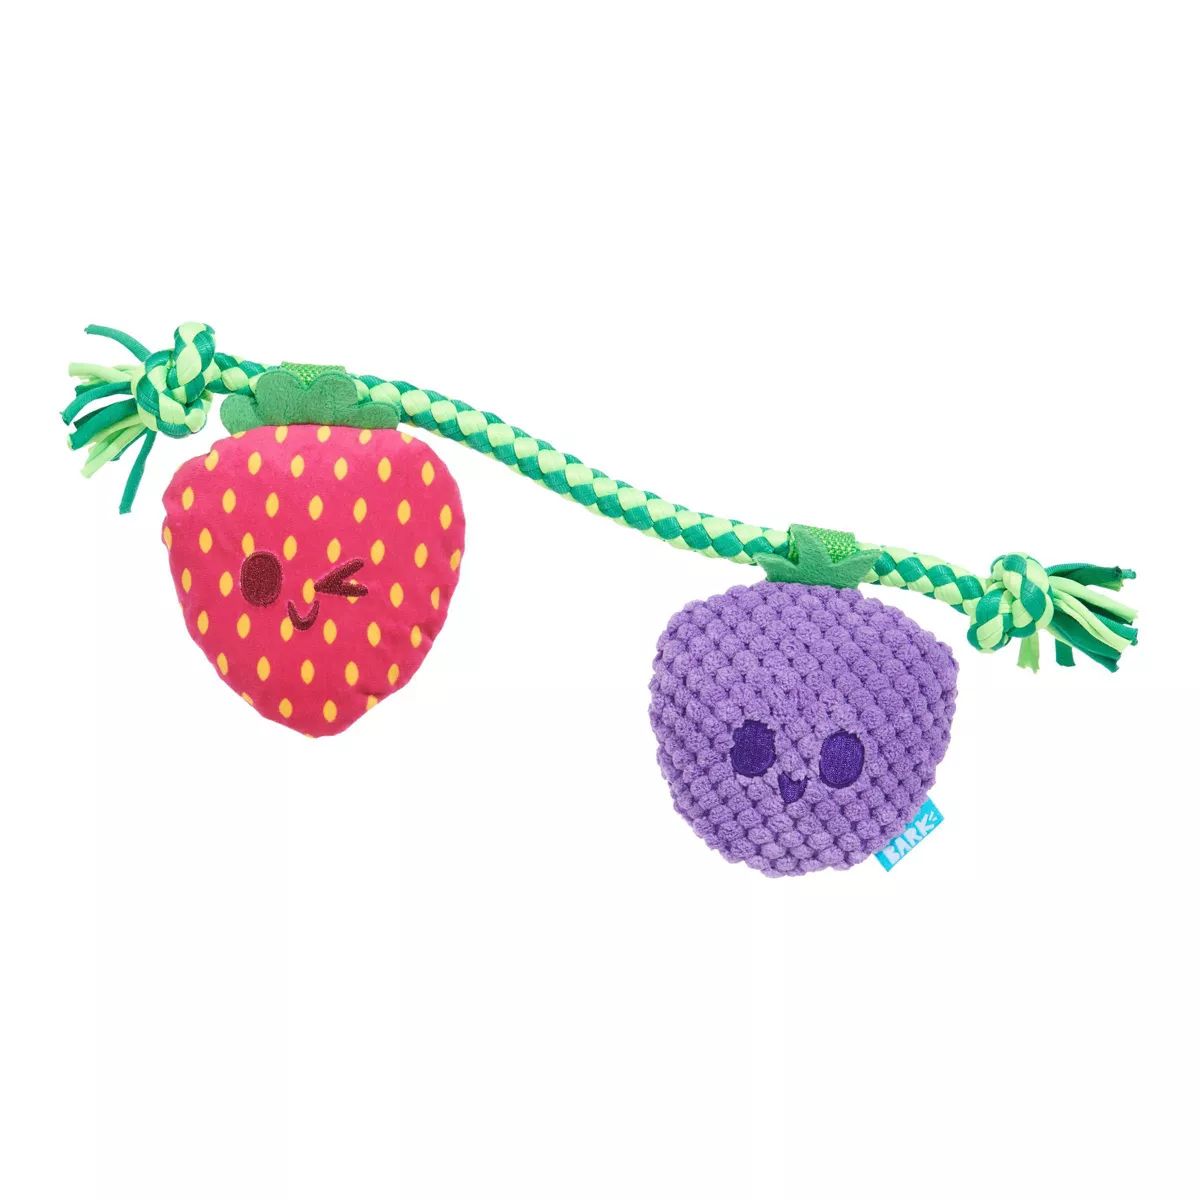 BARK 1.5" Best Berry Friends Rope and Plush Dog Toy | Target